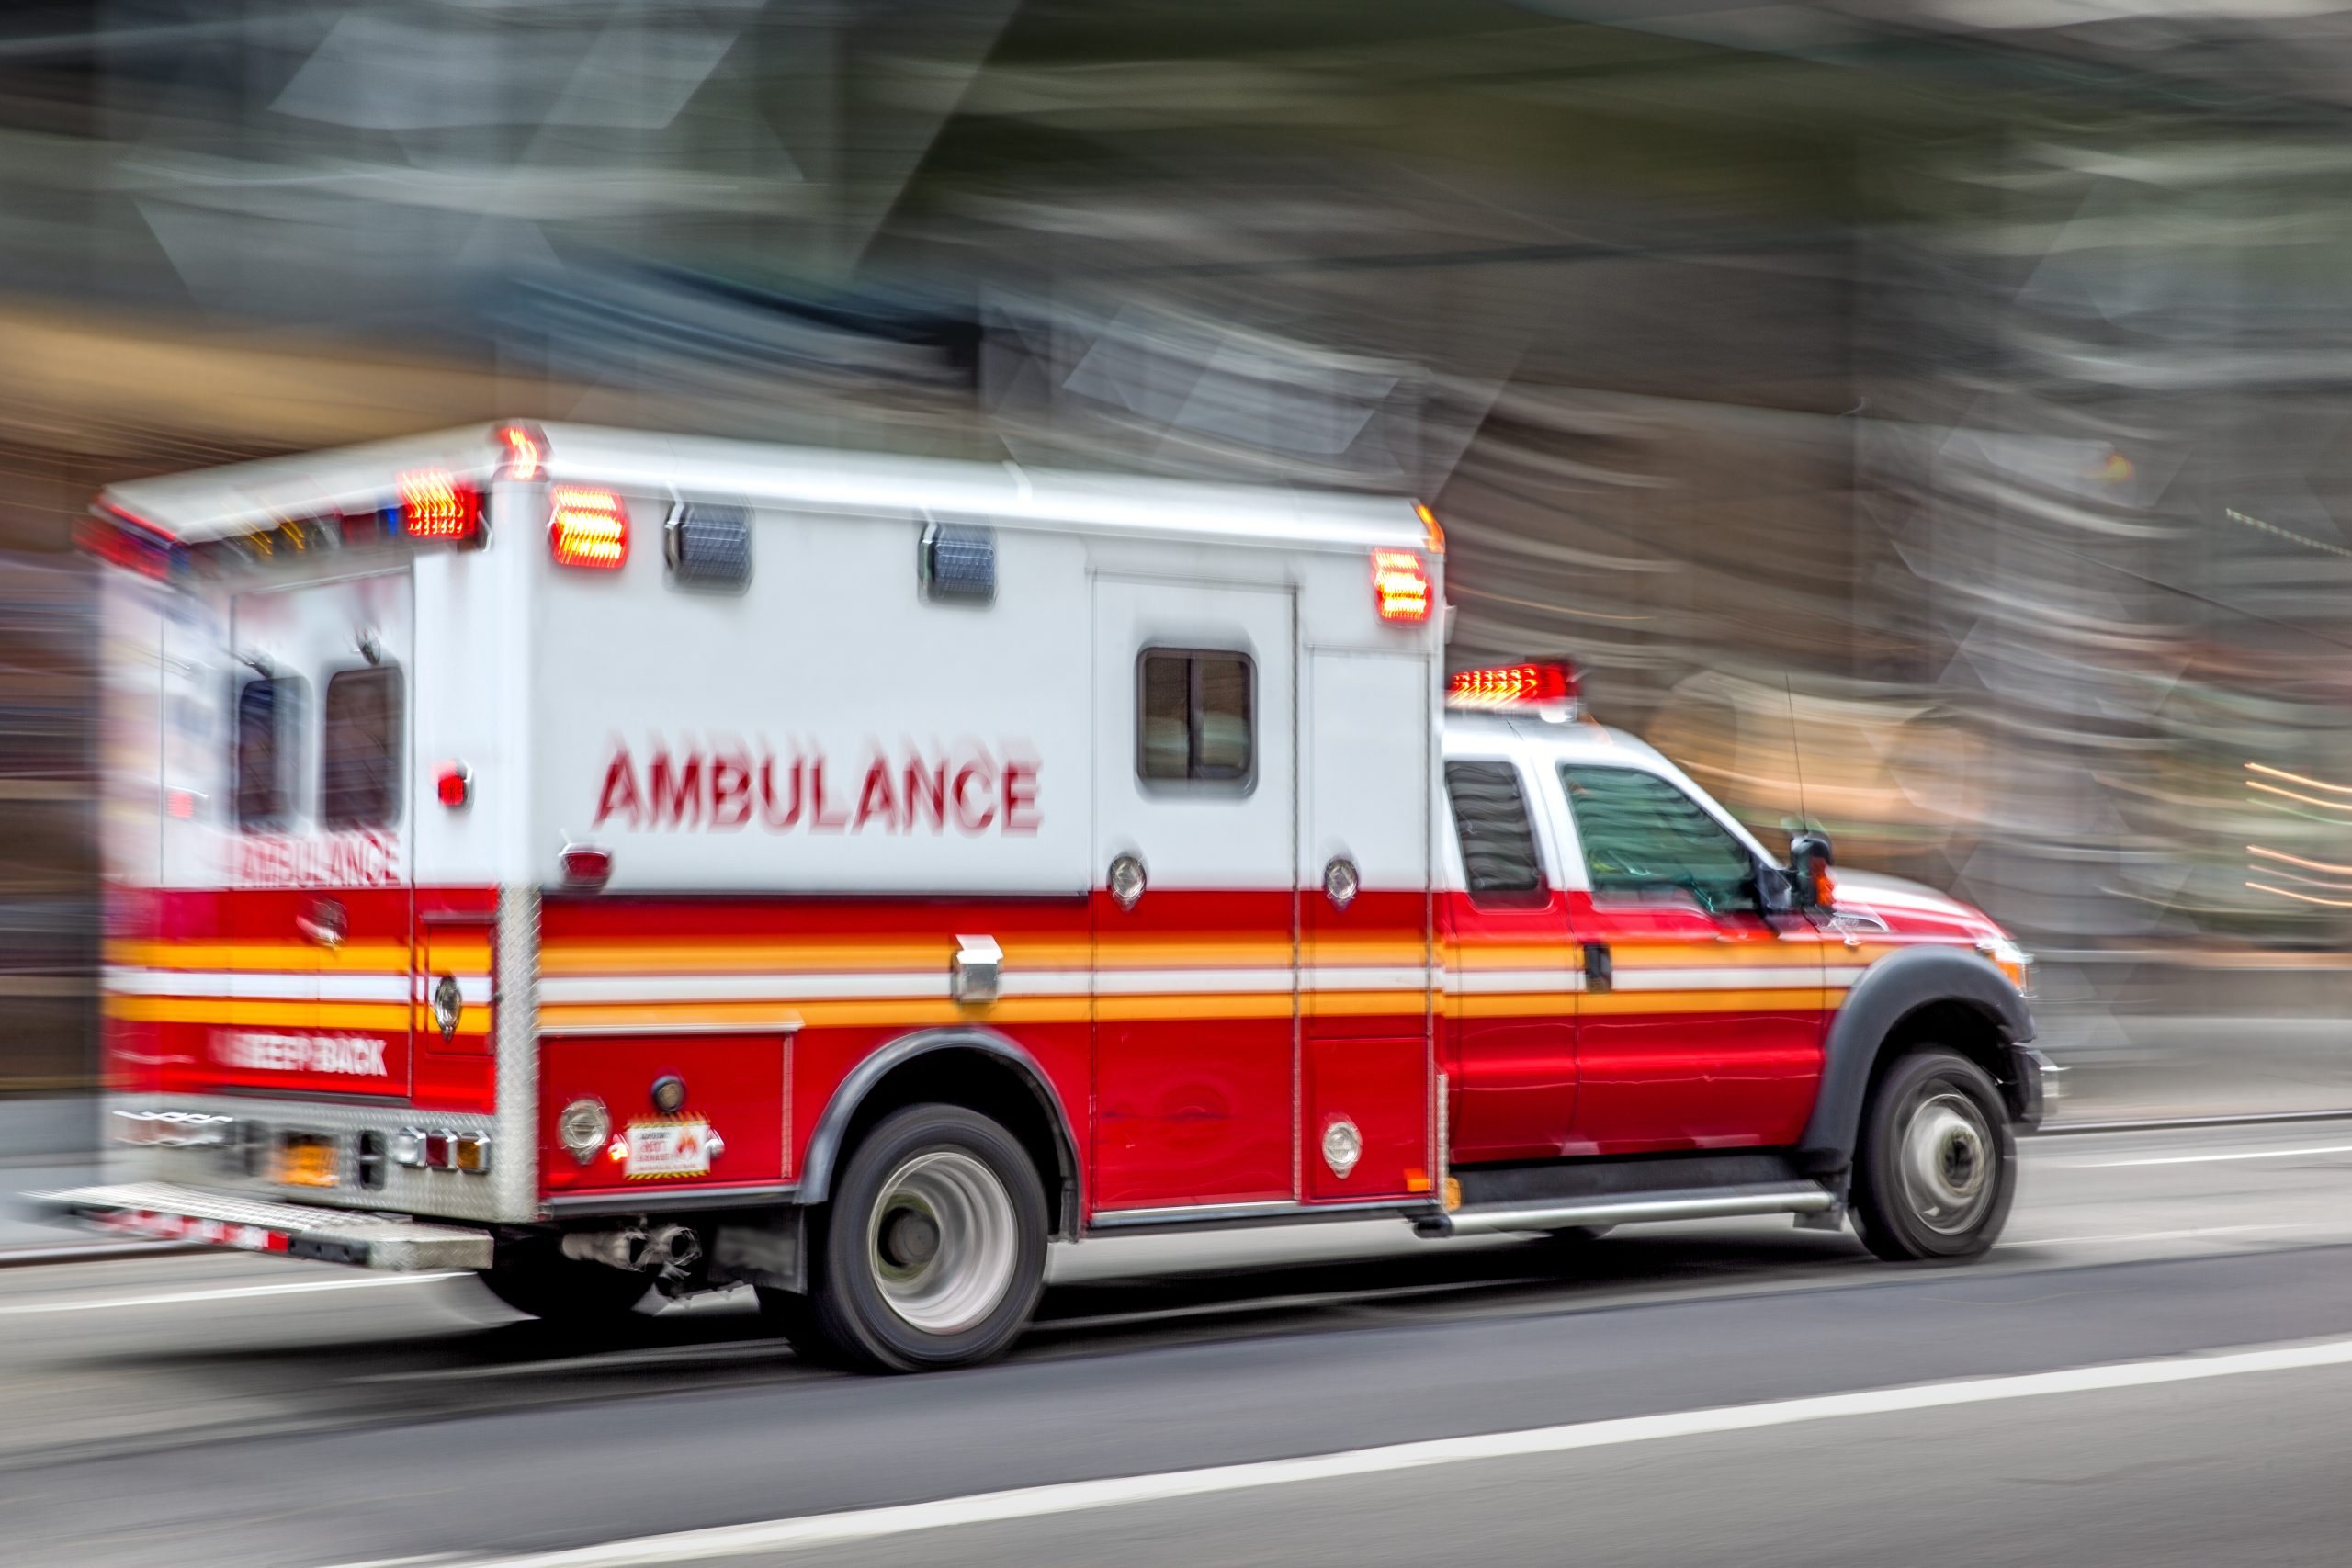 Picture of a speeding ambulance